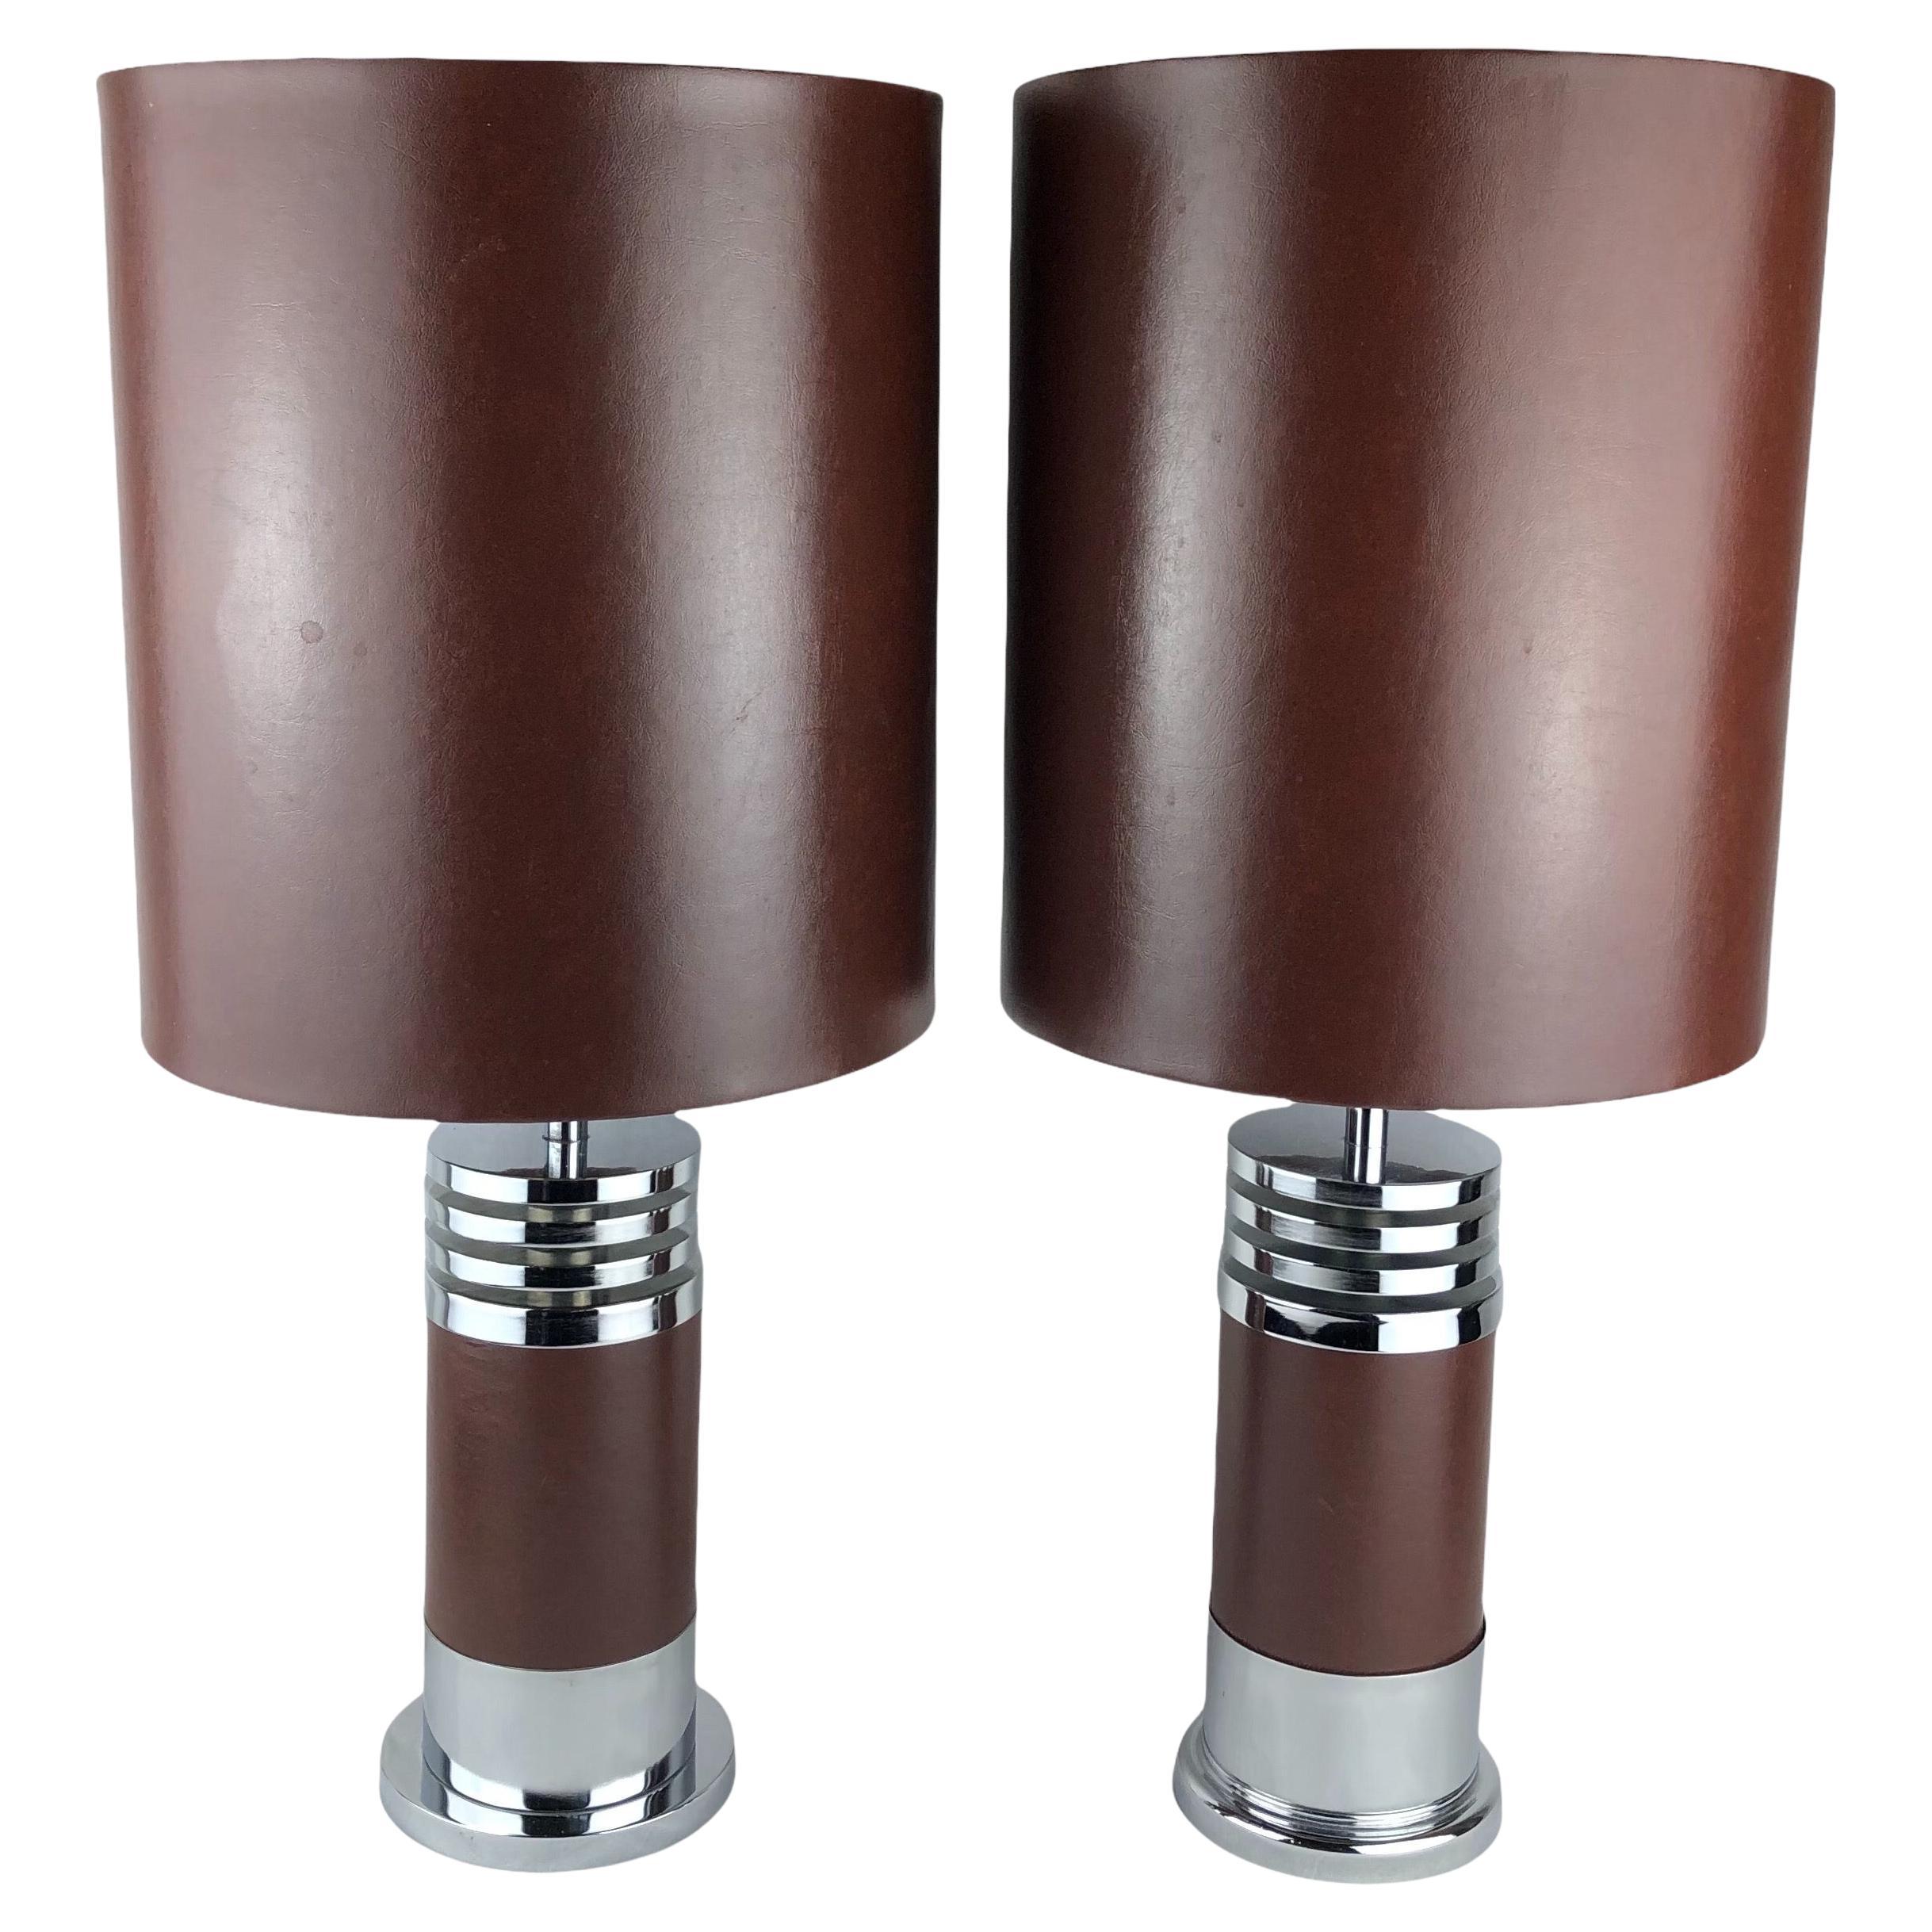 Pair of 1975 Chrome Lamps from Roche Bobois Designs